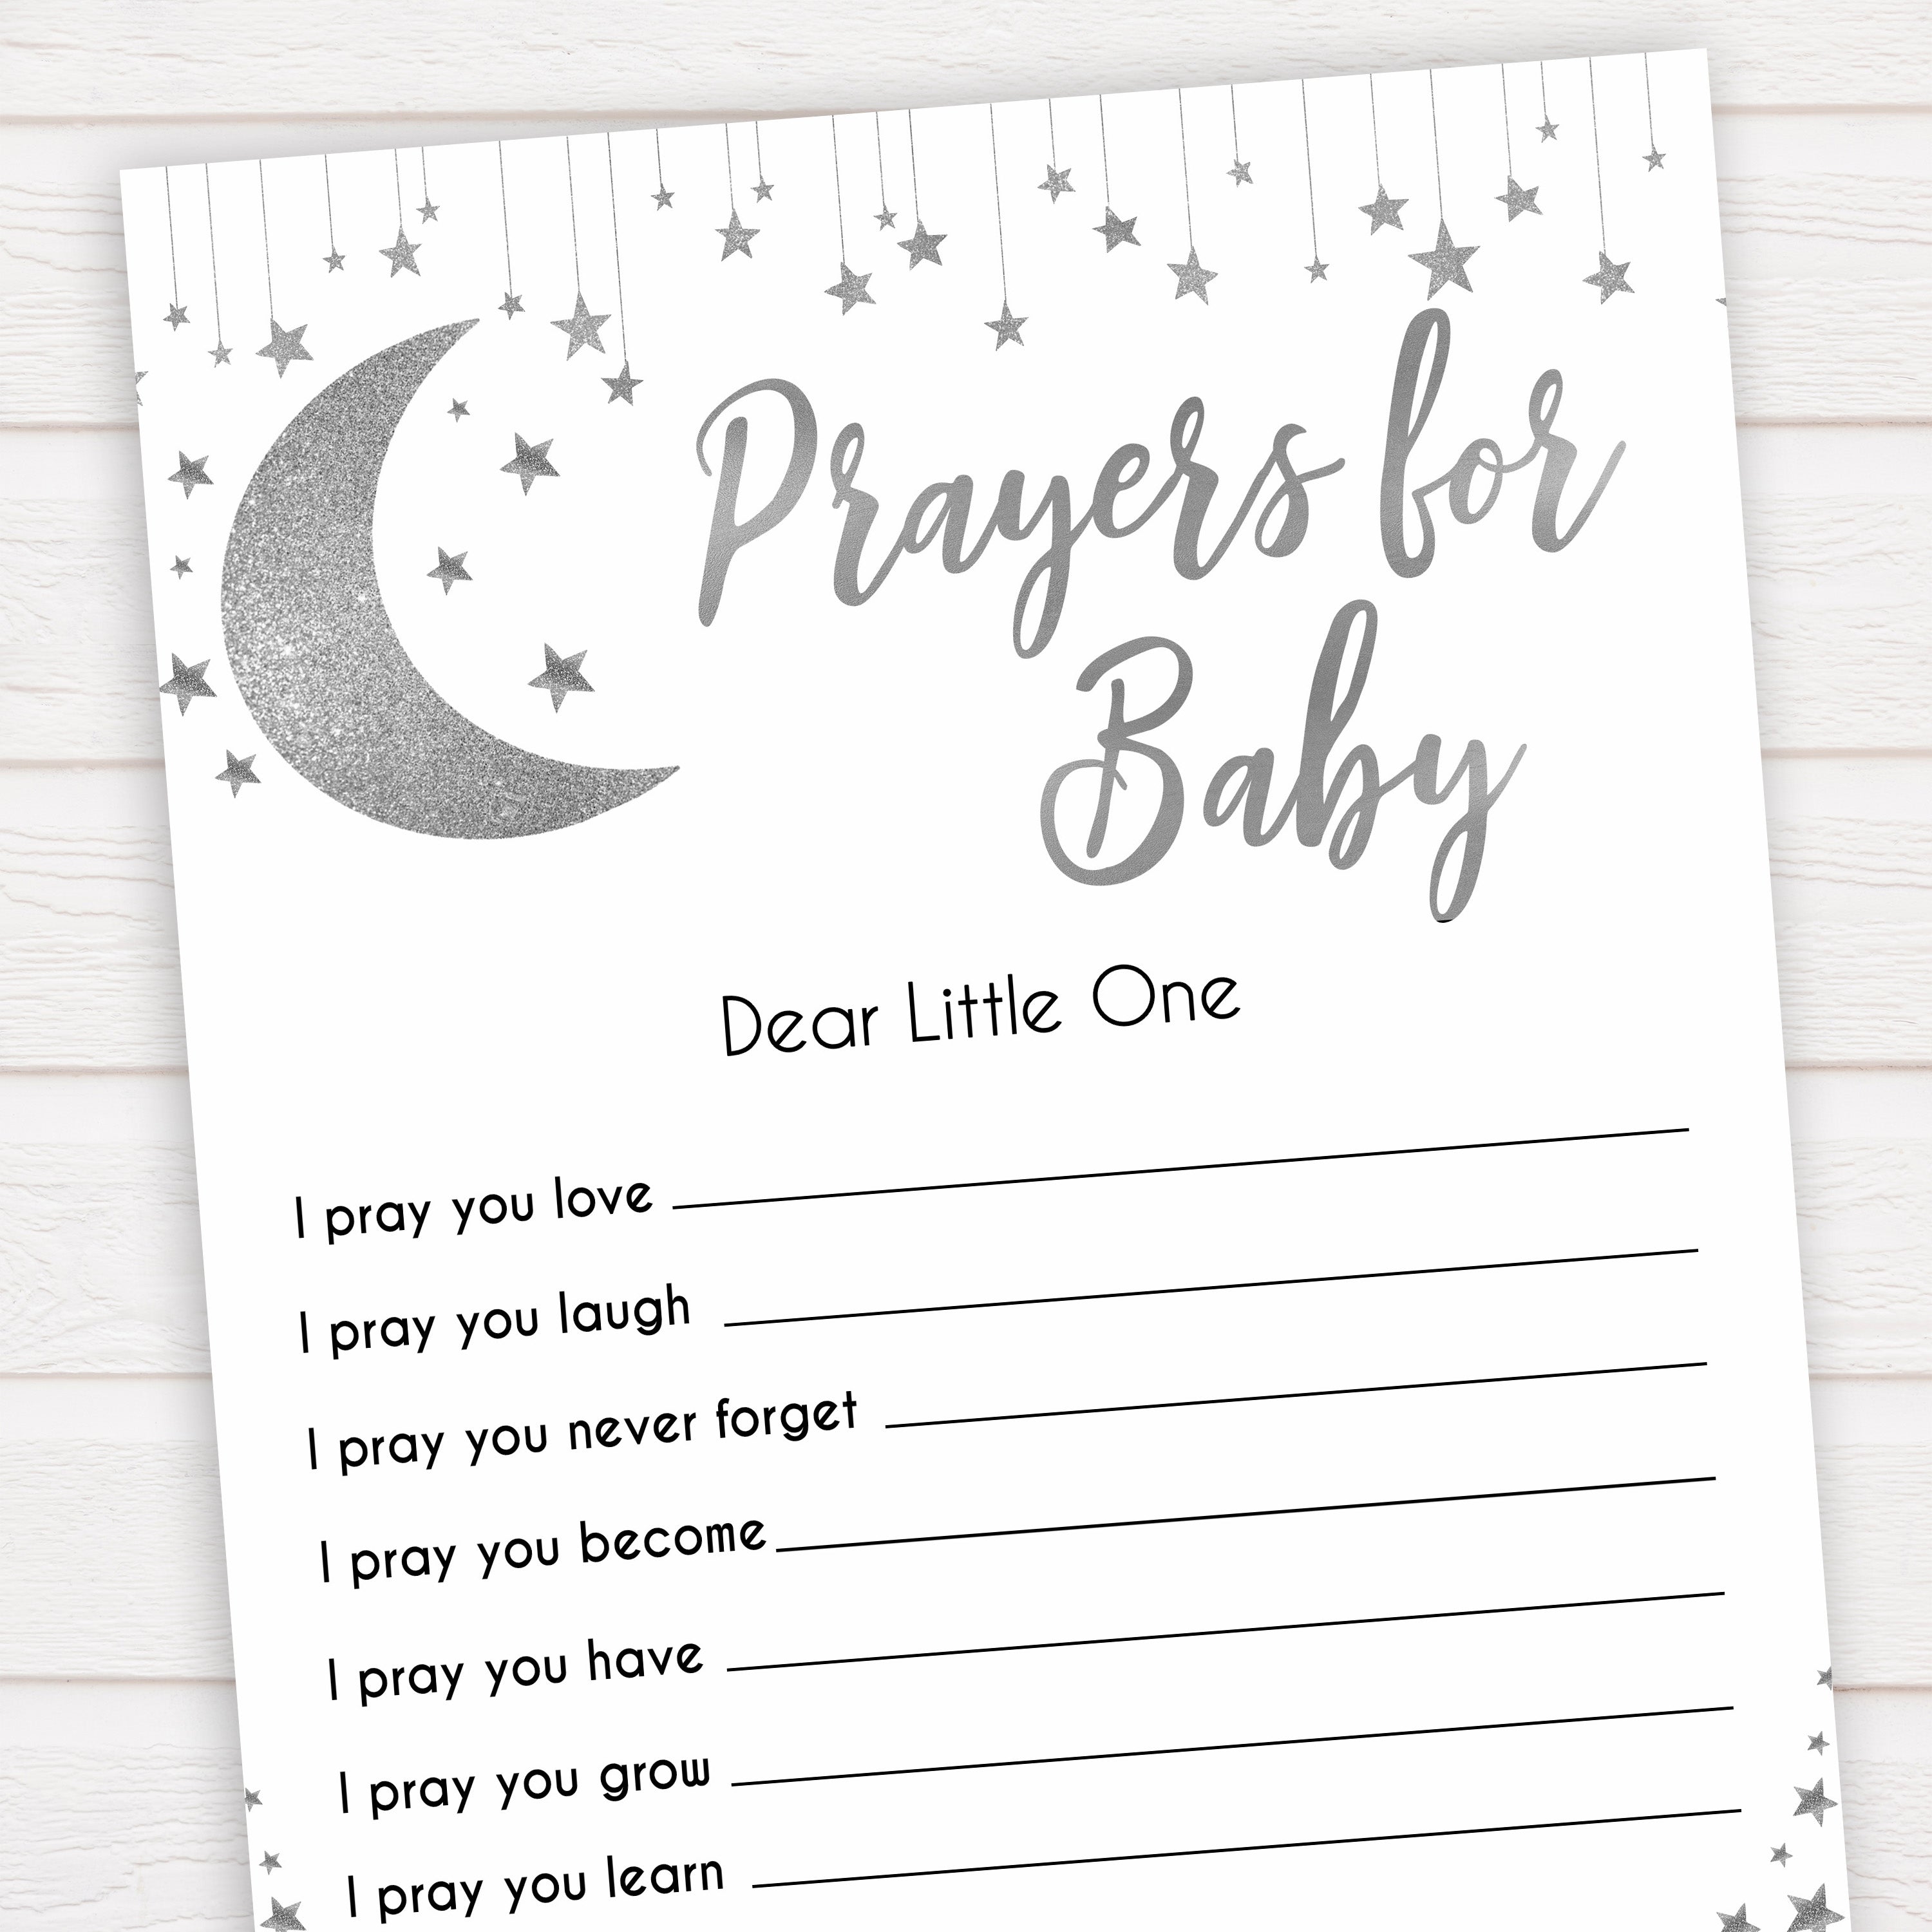 Silver little star, prayers for baby baby games, baby shower games, printable baby games, fun baby games, twinkle little star games, baby games, fun baby shower ideas, baby shower ideas